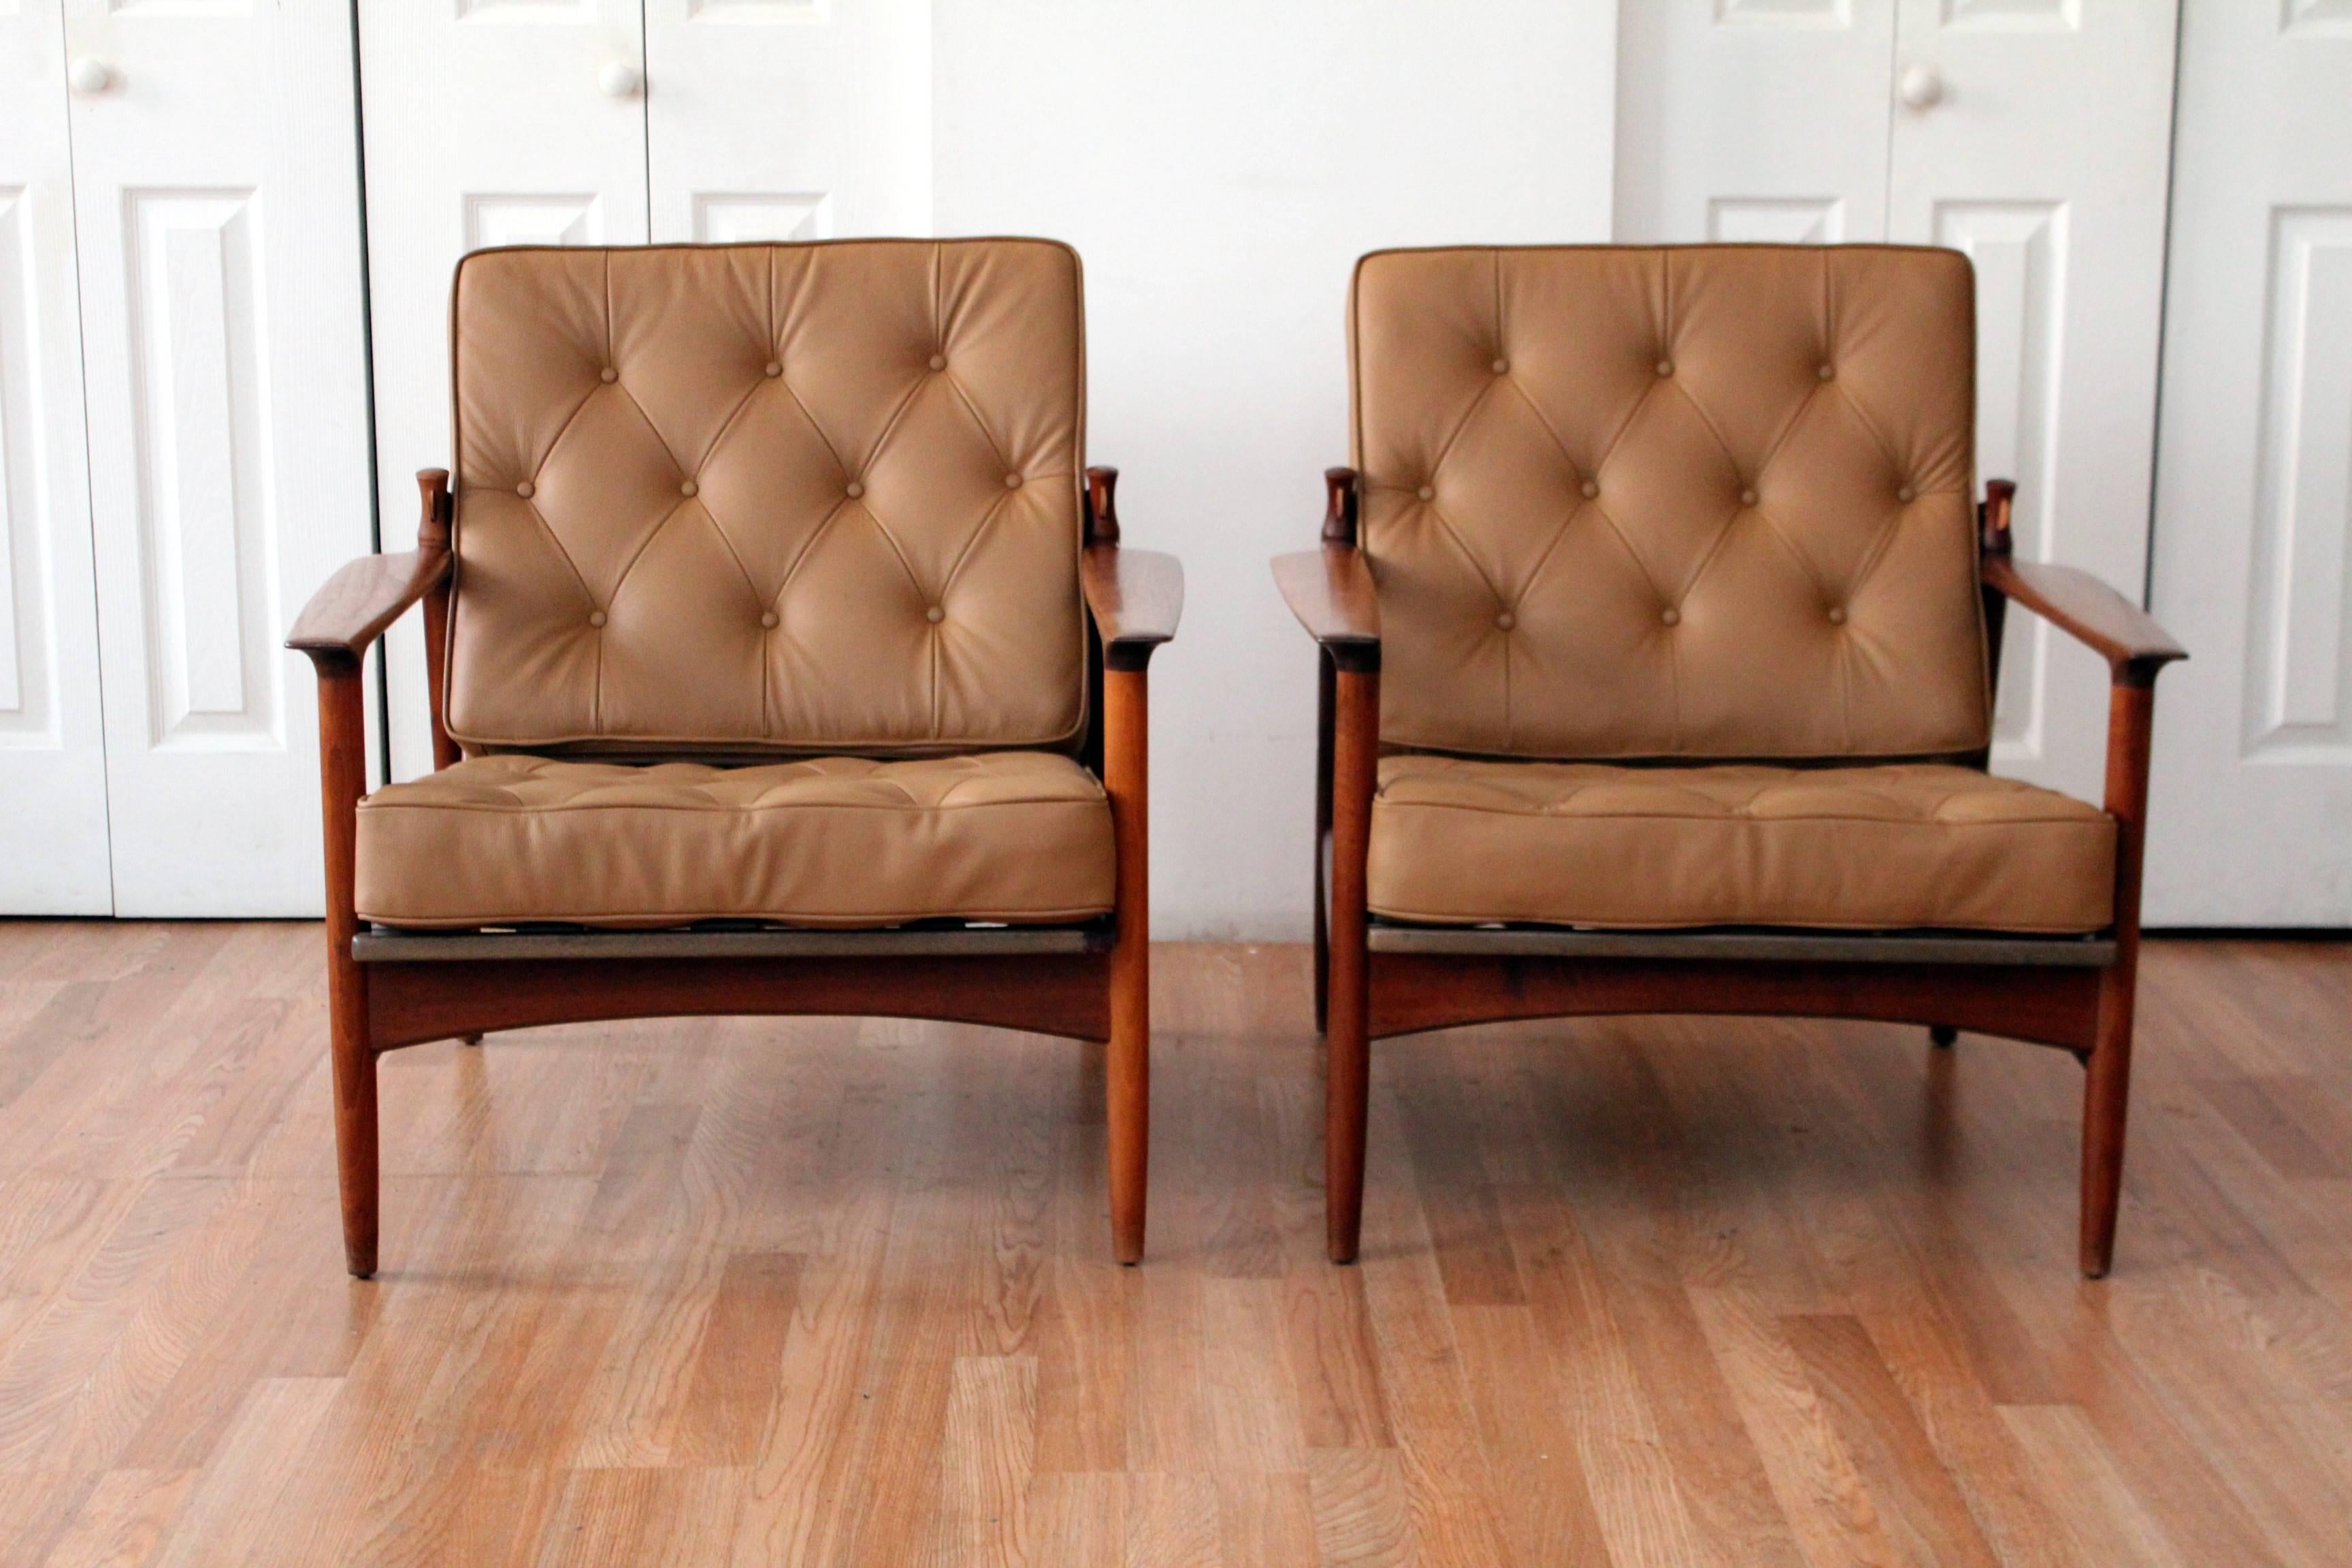 Rare Kofod Larsen Selig leather lounge chairs

Those of you that know us, know that we do not toss the word rare around easily, but in this case, we feel its justified.

Solid walnut Kofod Larsen lounge chair,s thoroughly reupholstered by us, speaks